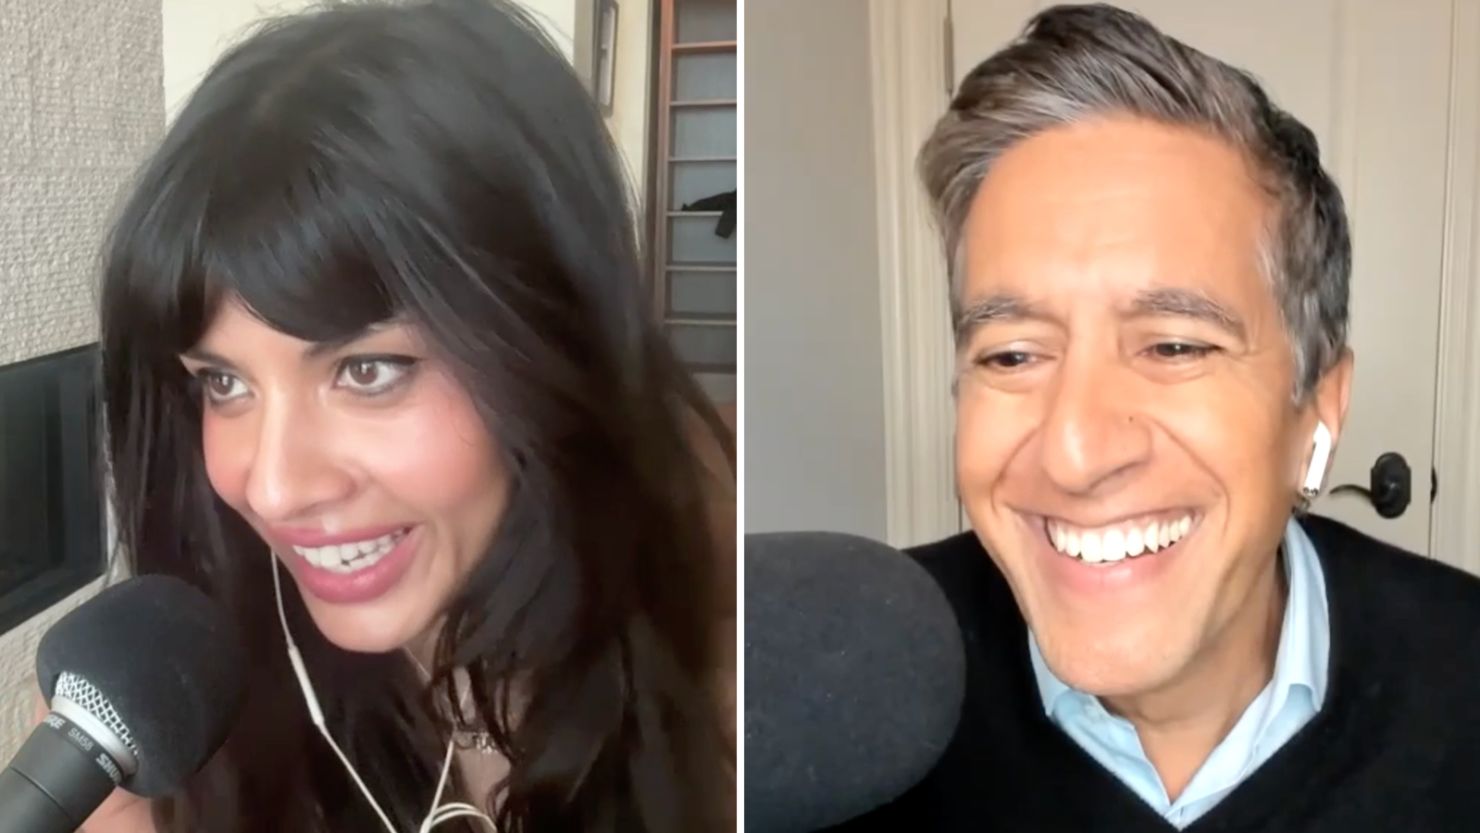 Actor and activist Jameela Jamil joined Dr. Sanjay Gupta on his podcast Chasing Life.